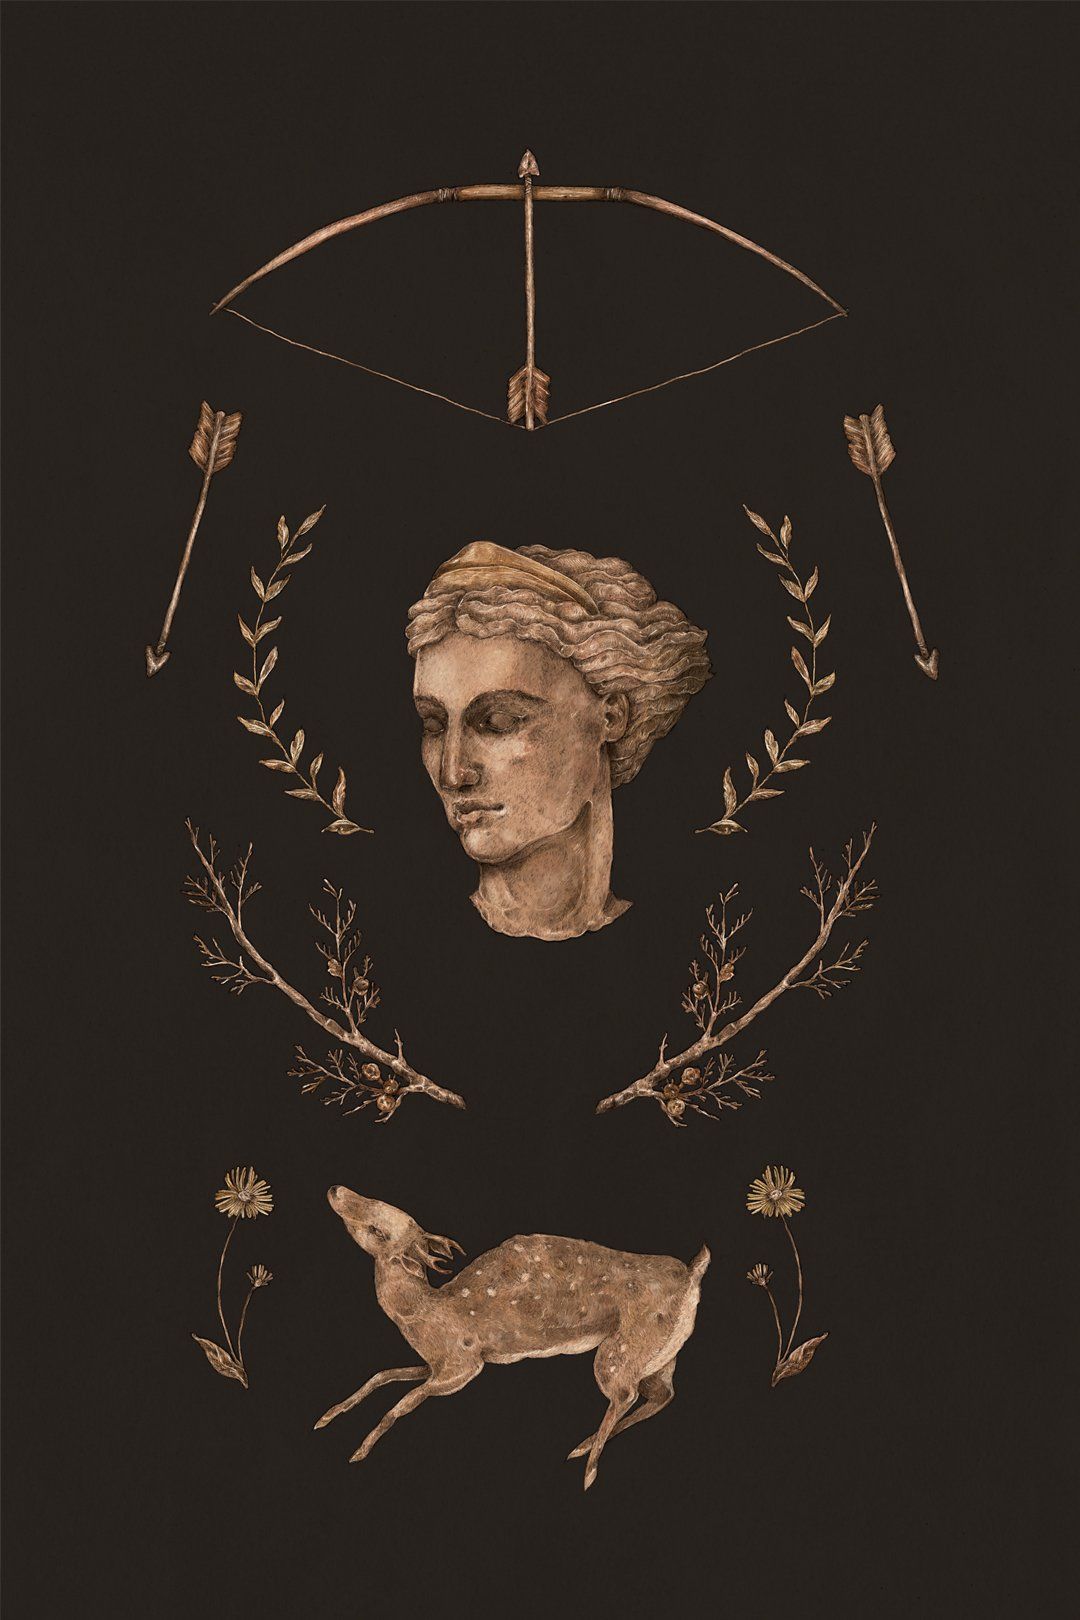 A poster with an image of the goddess and deer - Greek mythology, Artemis